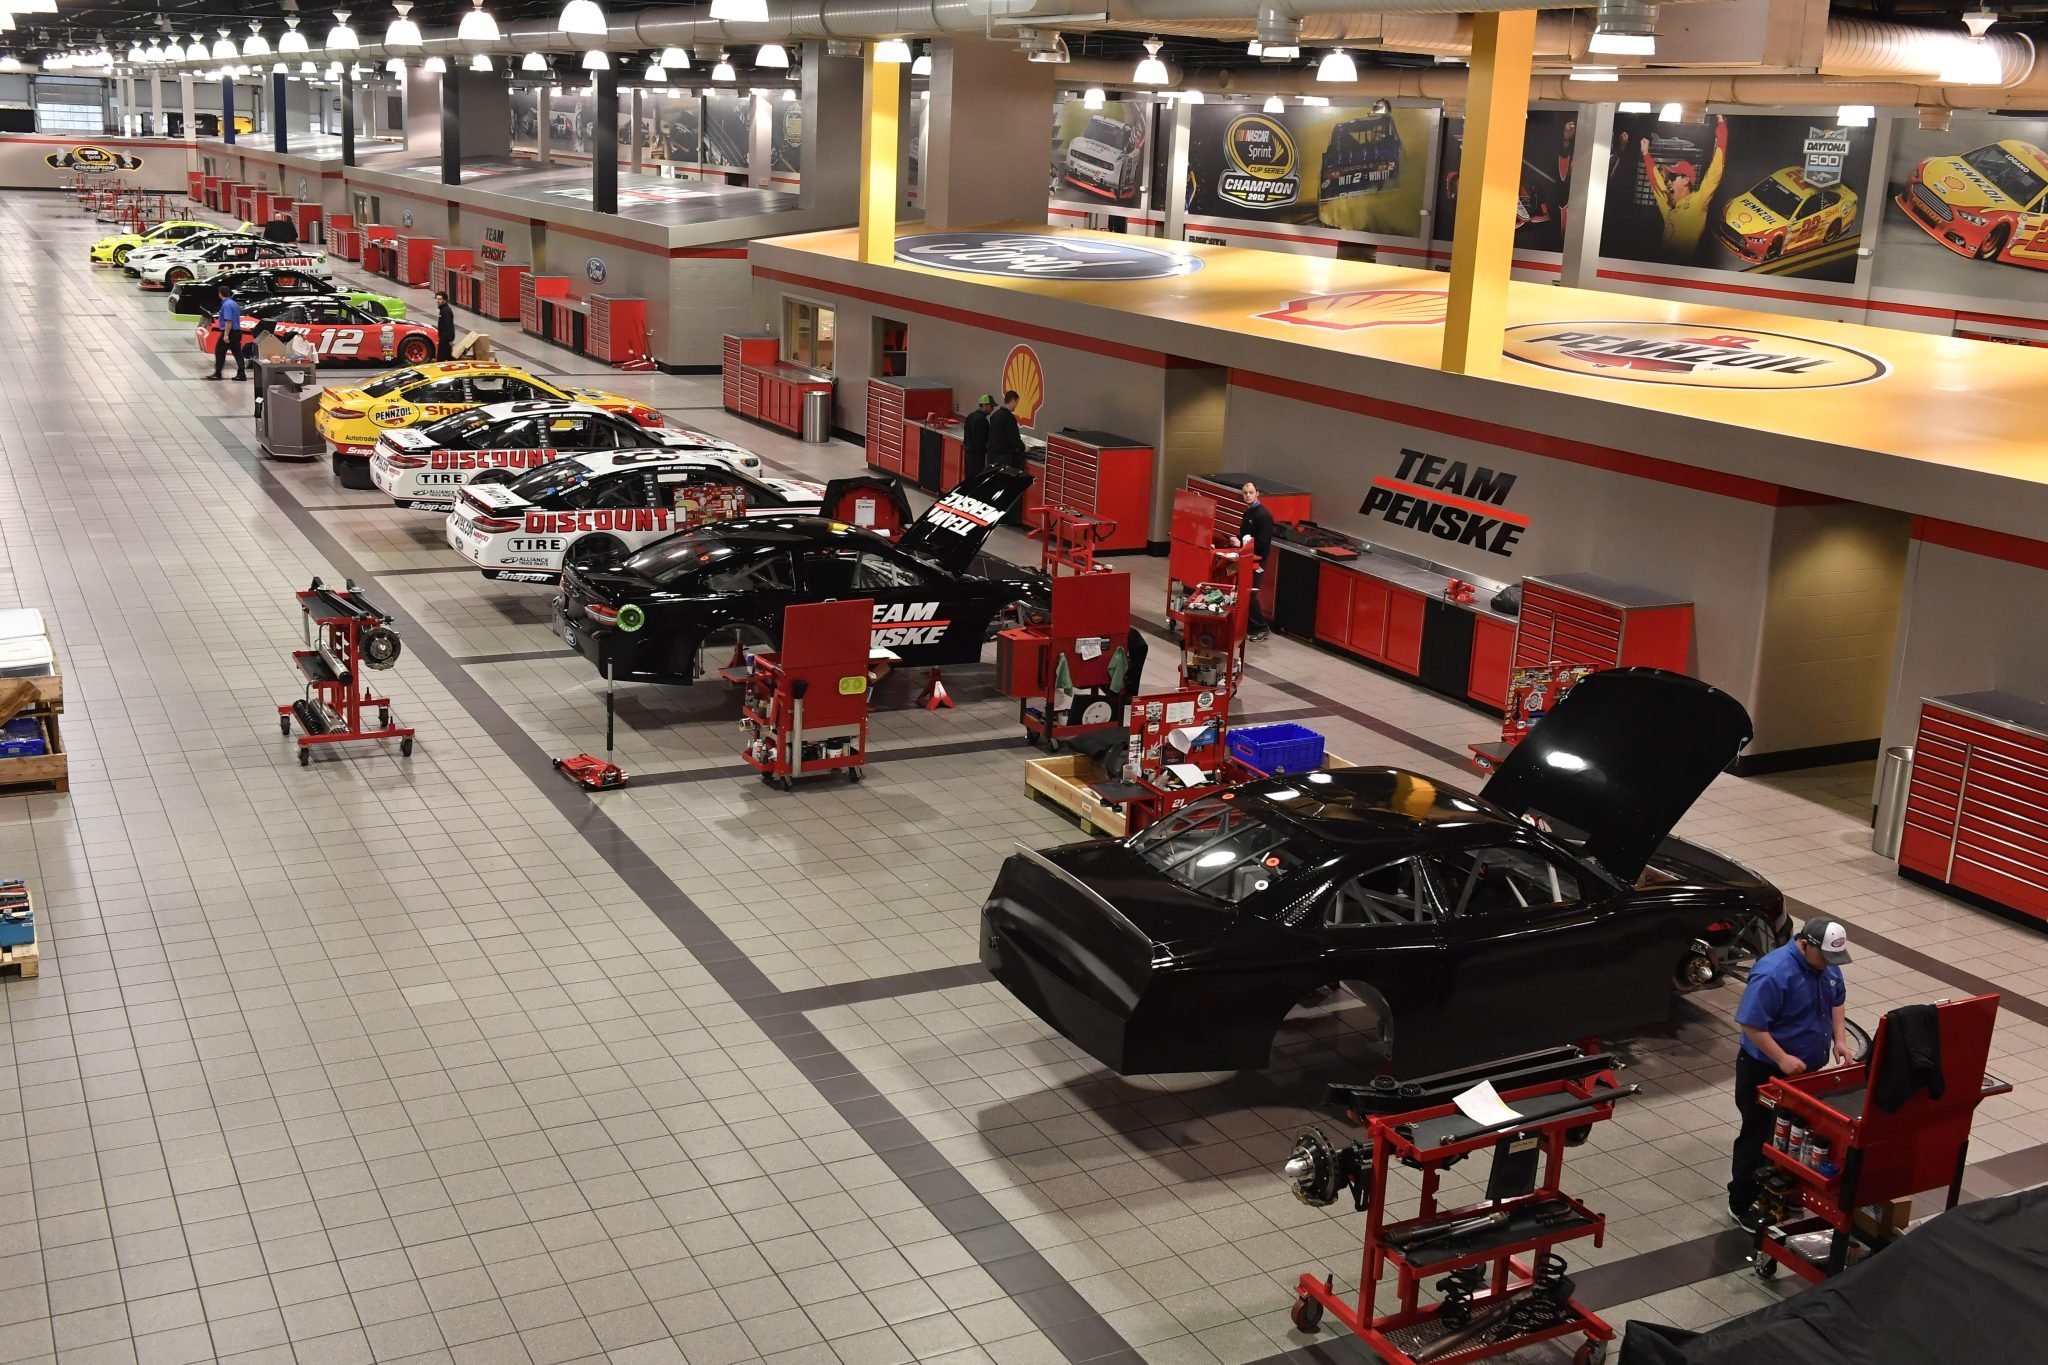 Experience for Charity: Team Penske Behind-The-Scenes Tour